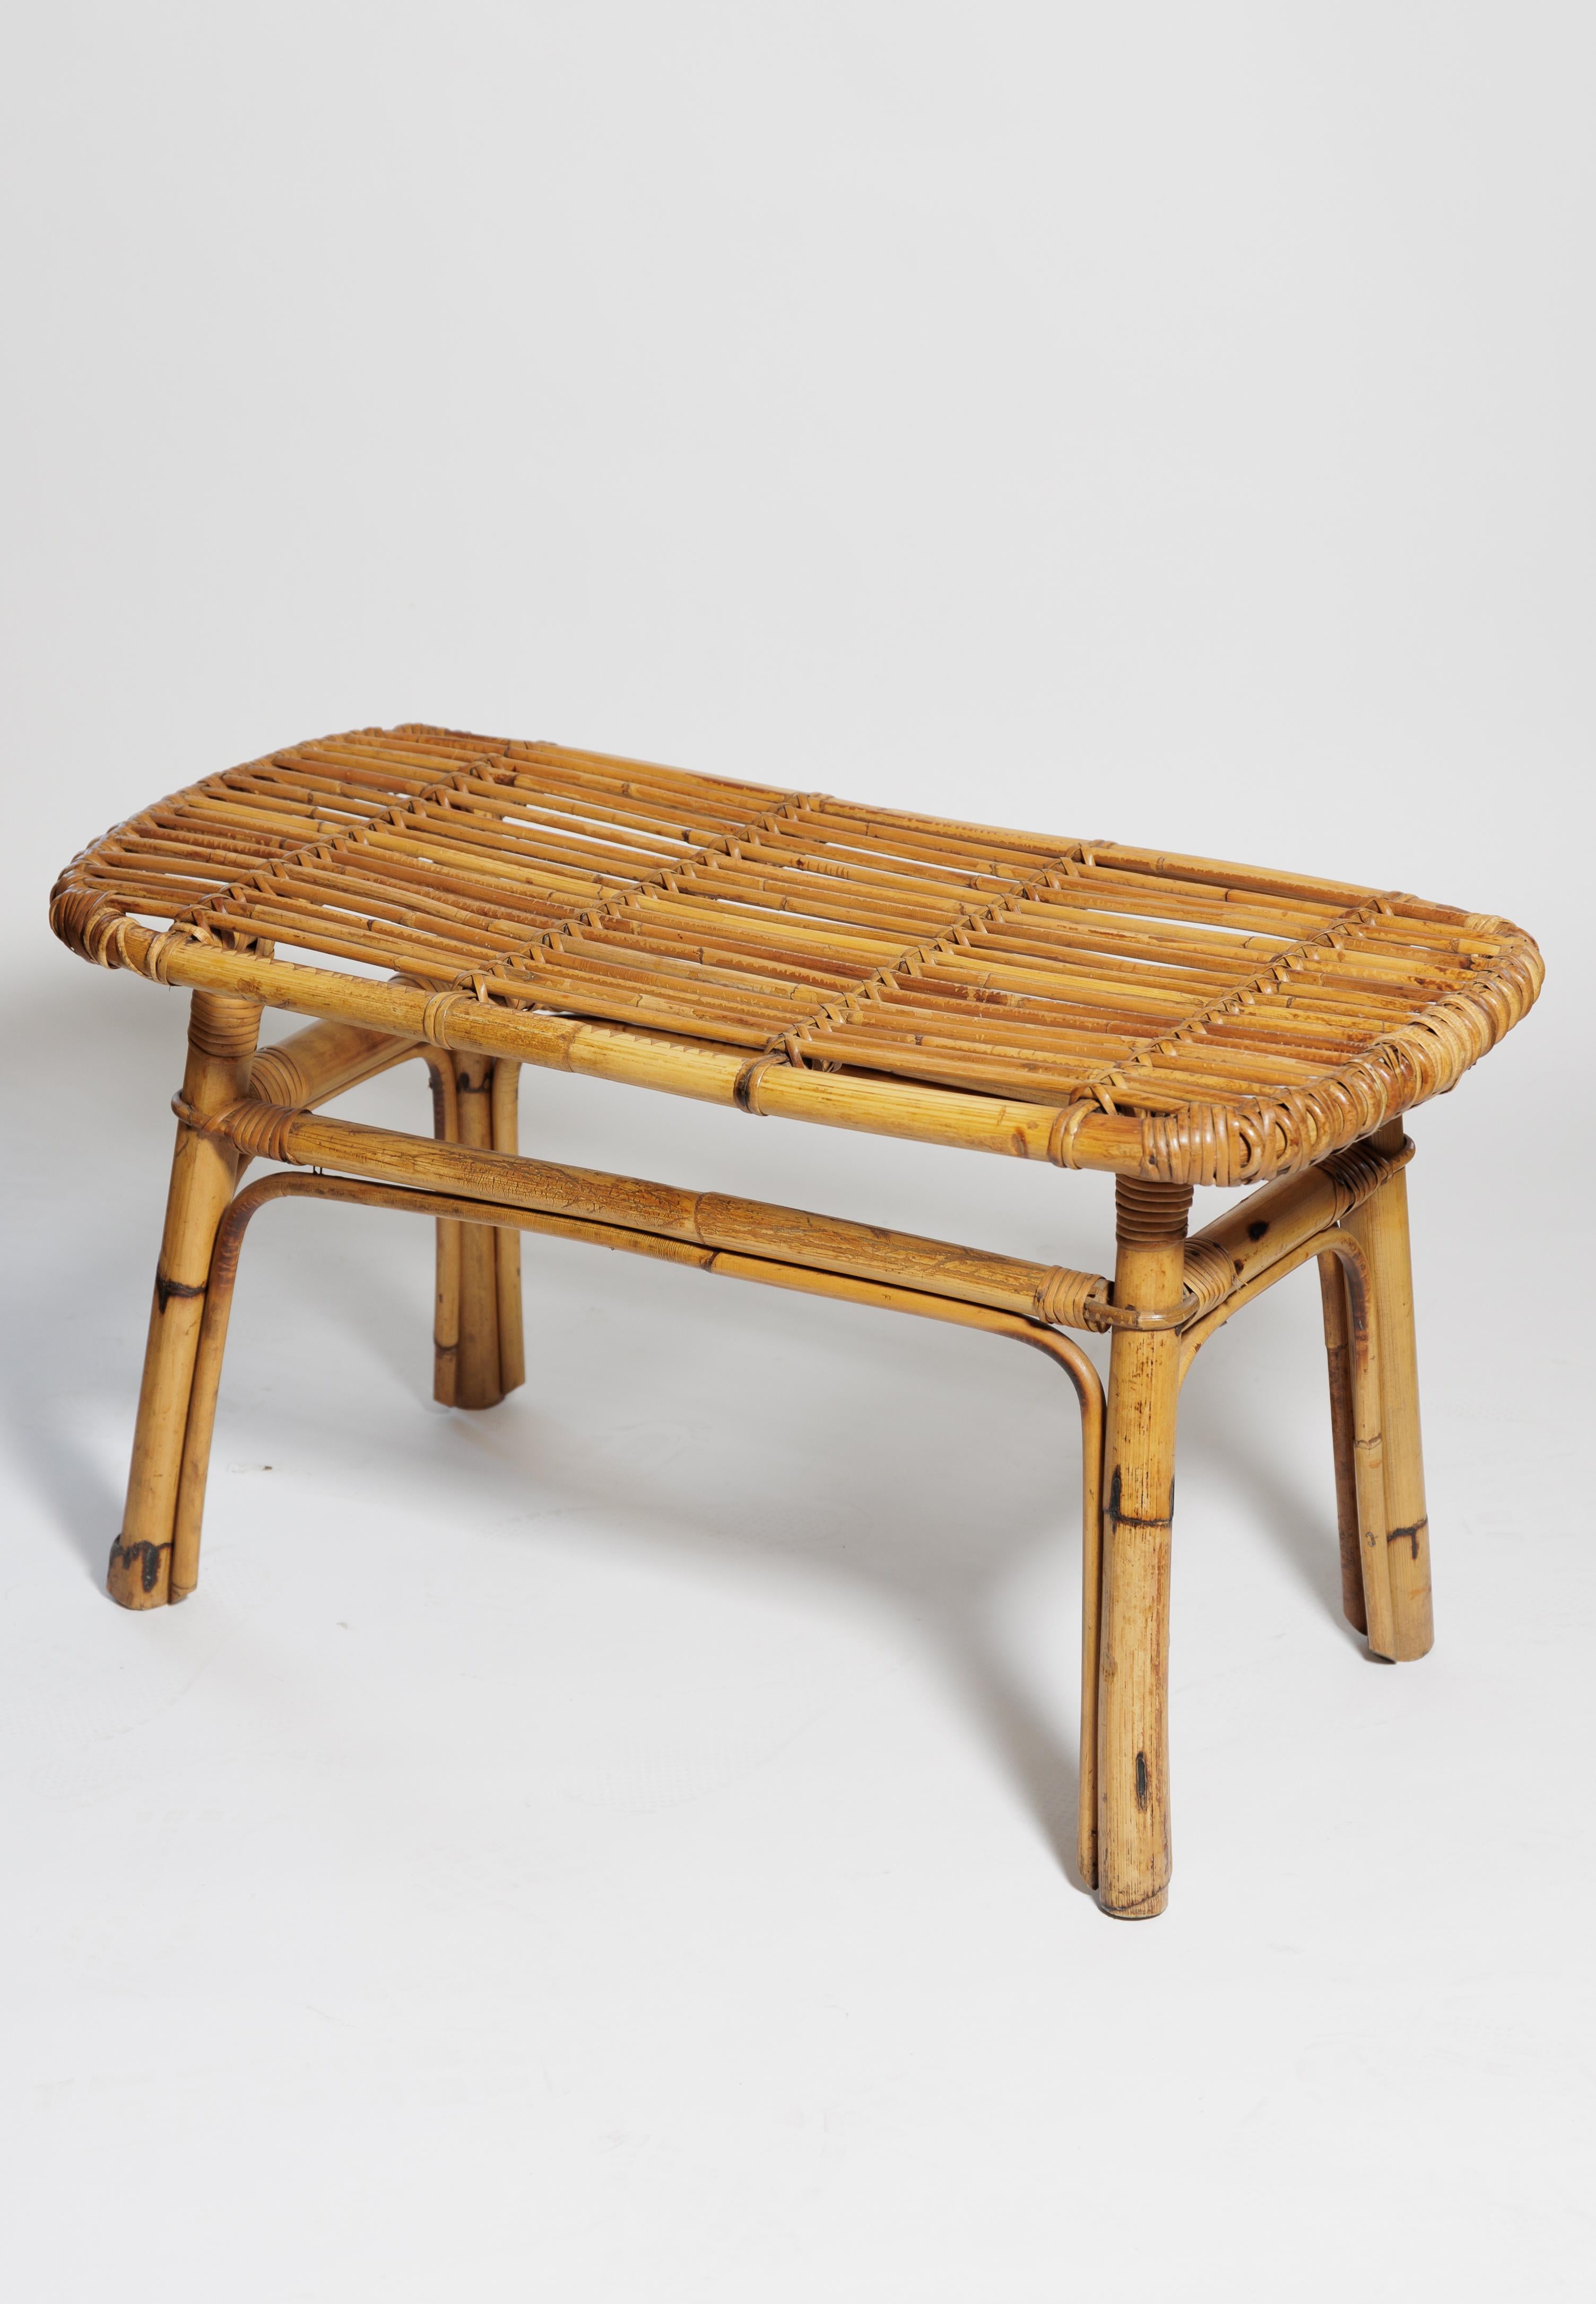 A lovely rattan bench can also be used as a table as well as seating.